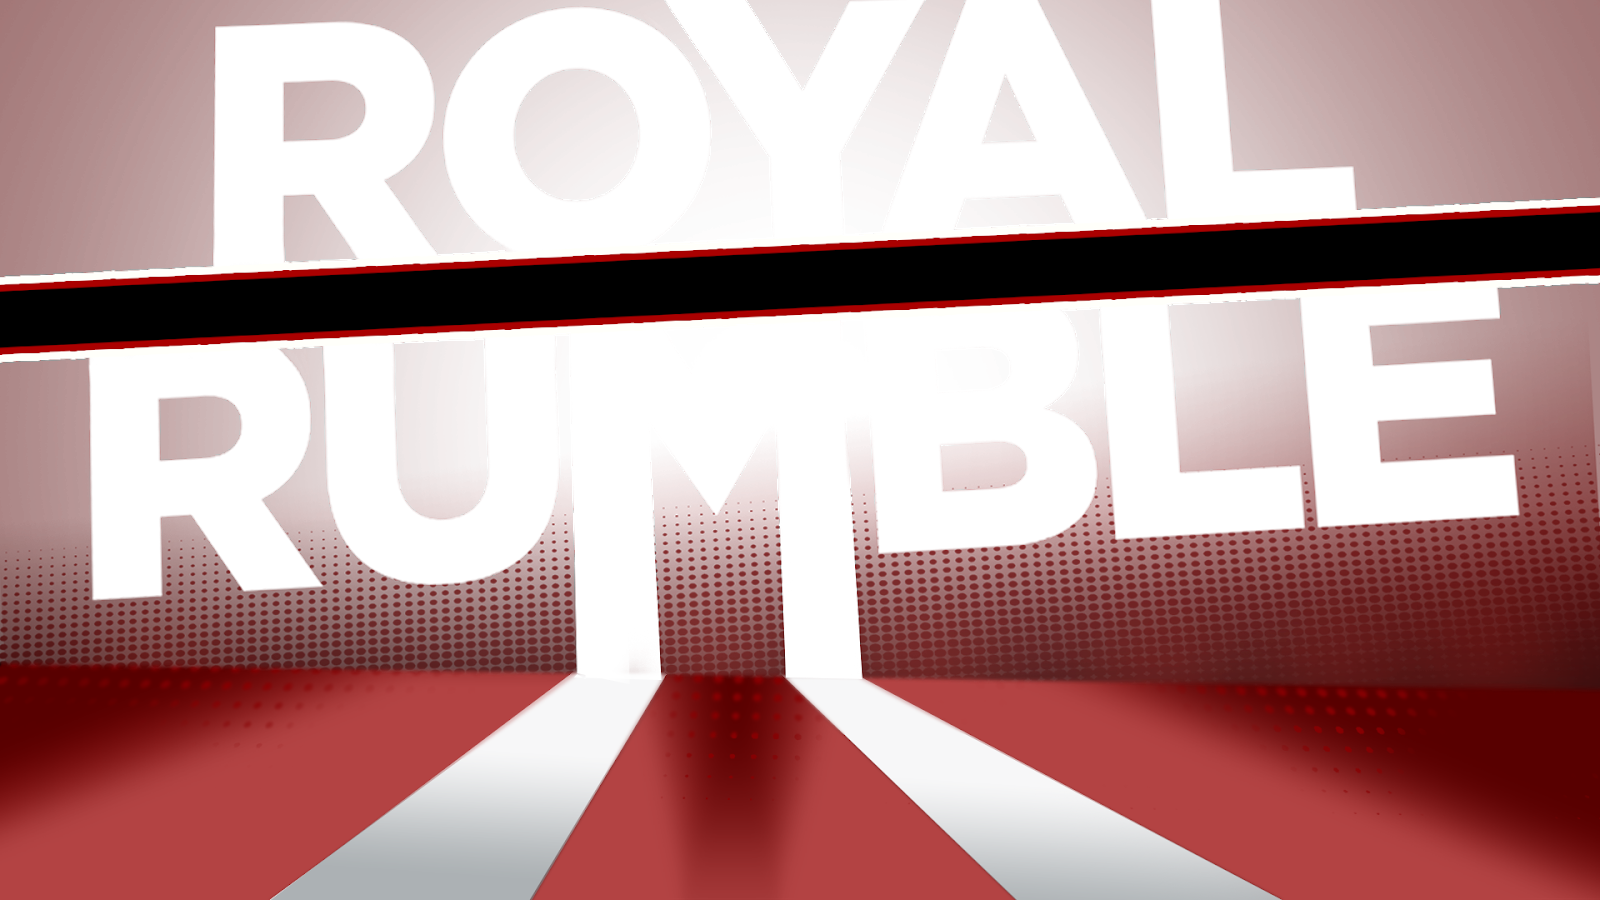 Renders Backgrounds LogoS: WWE ROYAL RUMBLE 2020 MATCH CARD PSD TEMPLATE